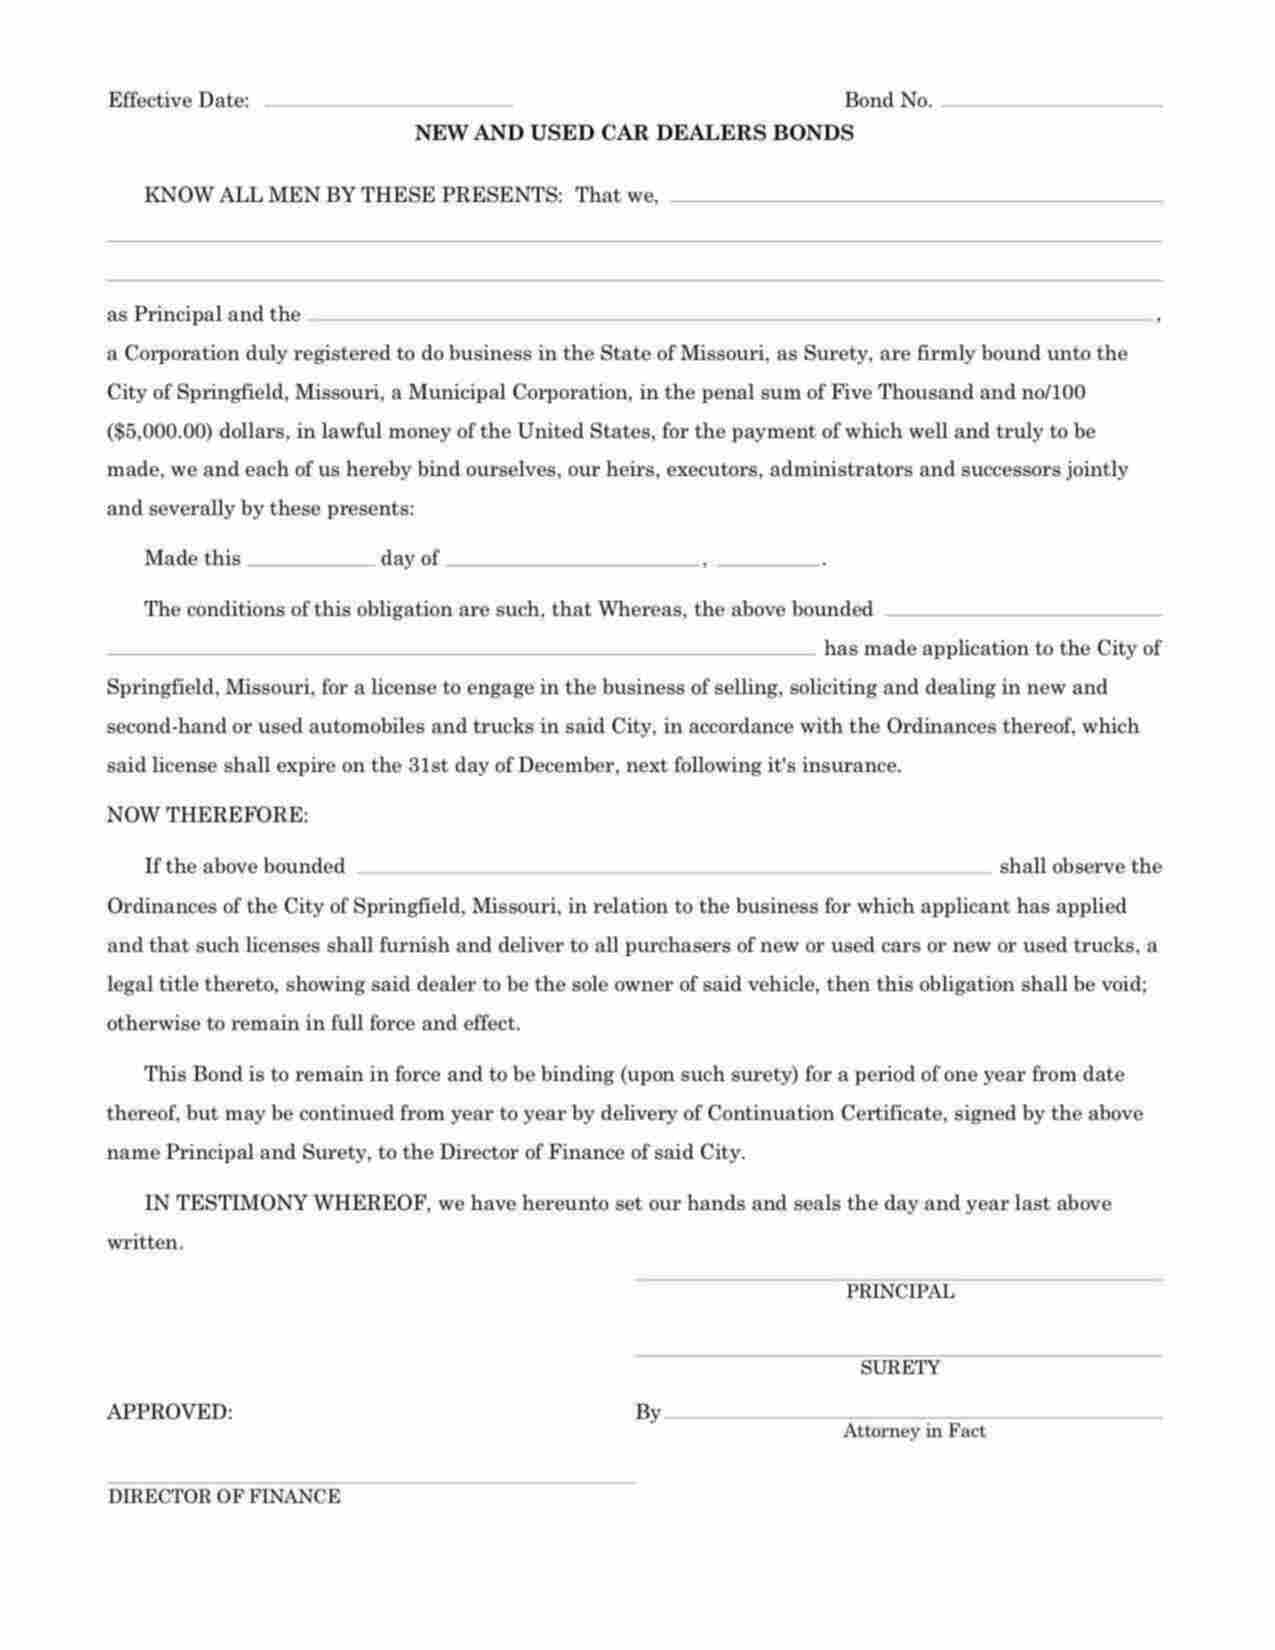 Missouri New and Used Car Dealers Bond Form